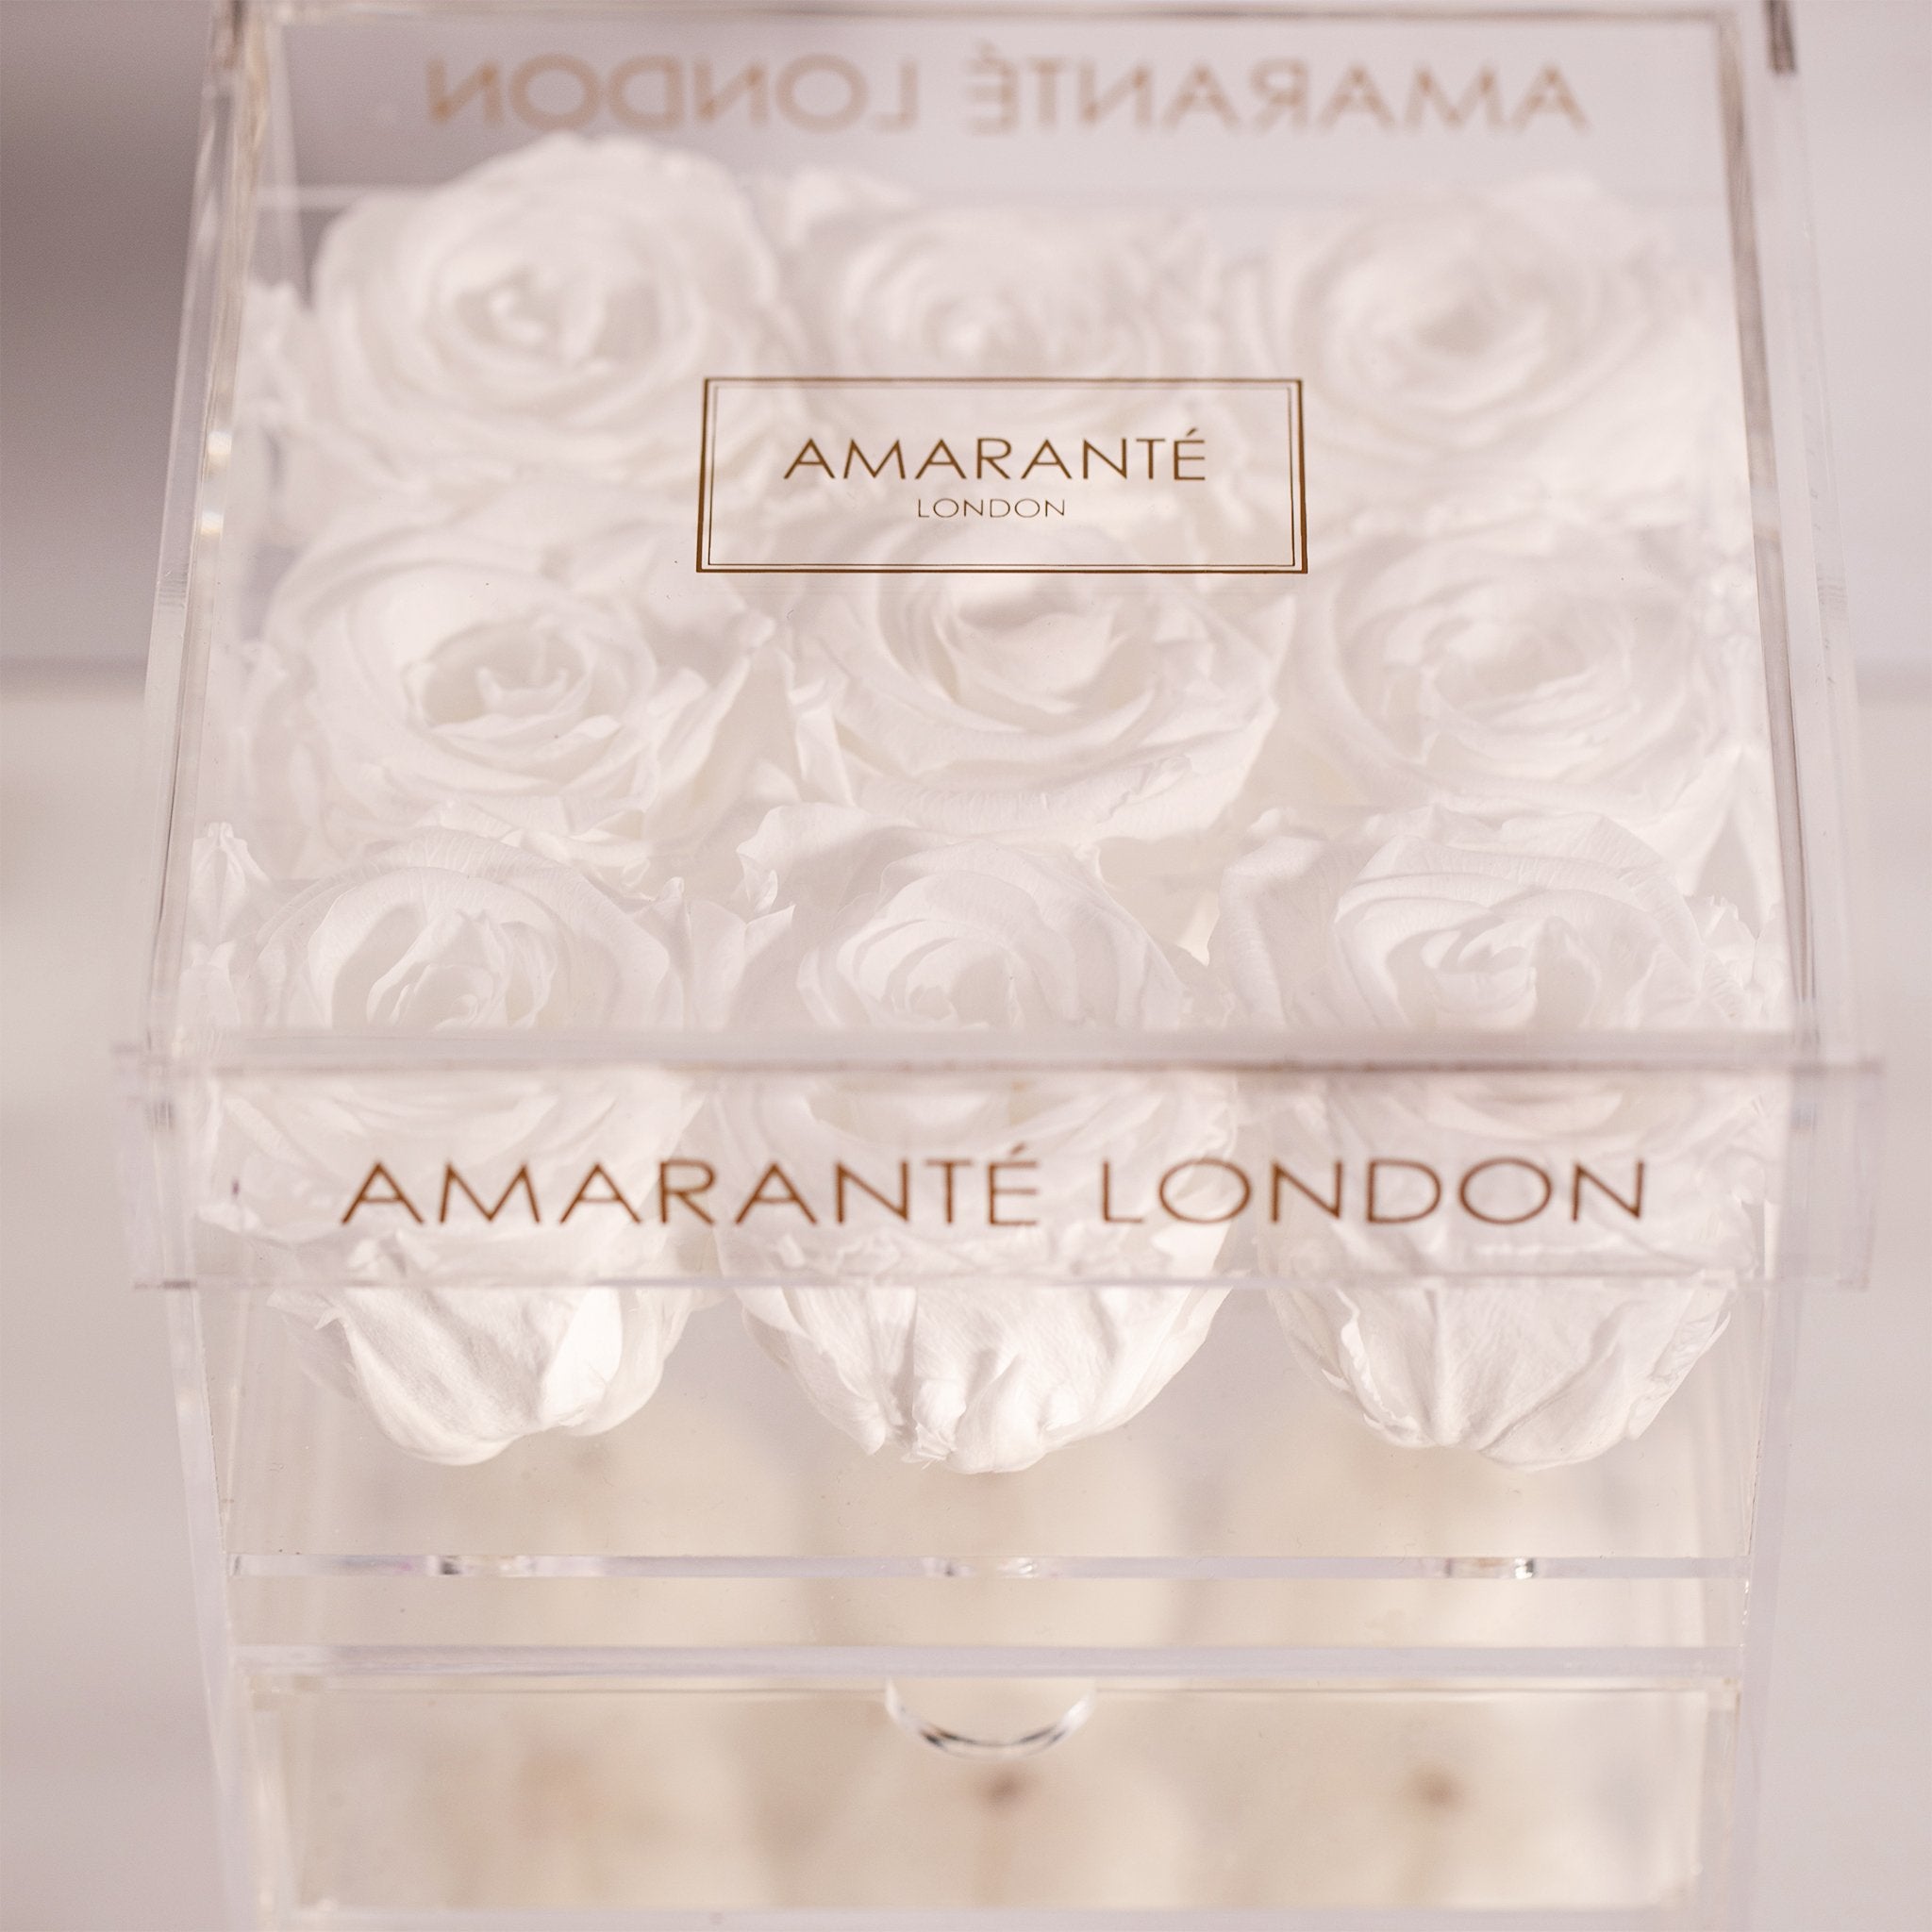 Captivating white Roses implying balance, clarity, and purity. 